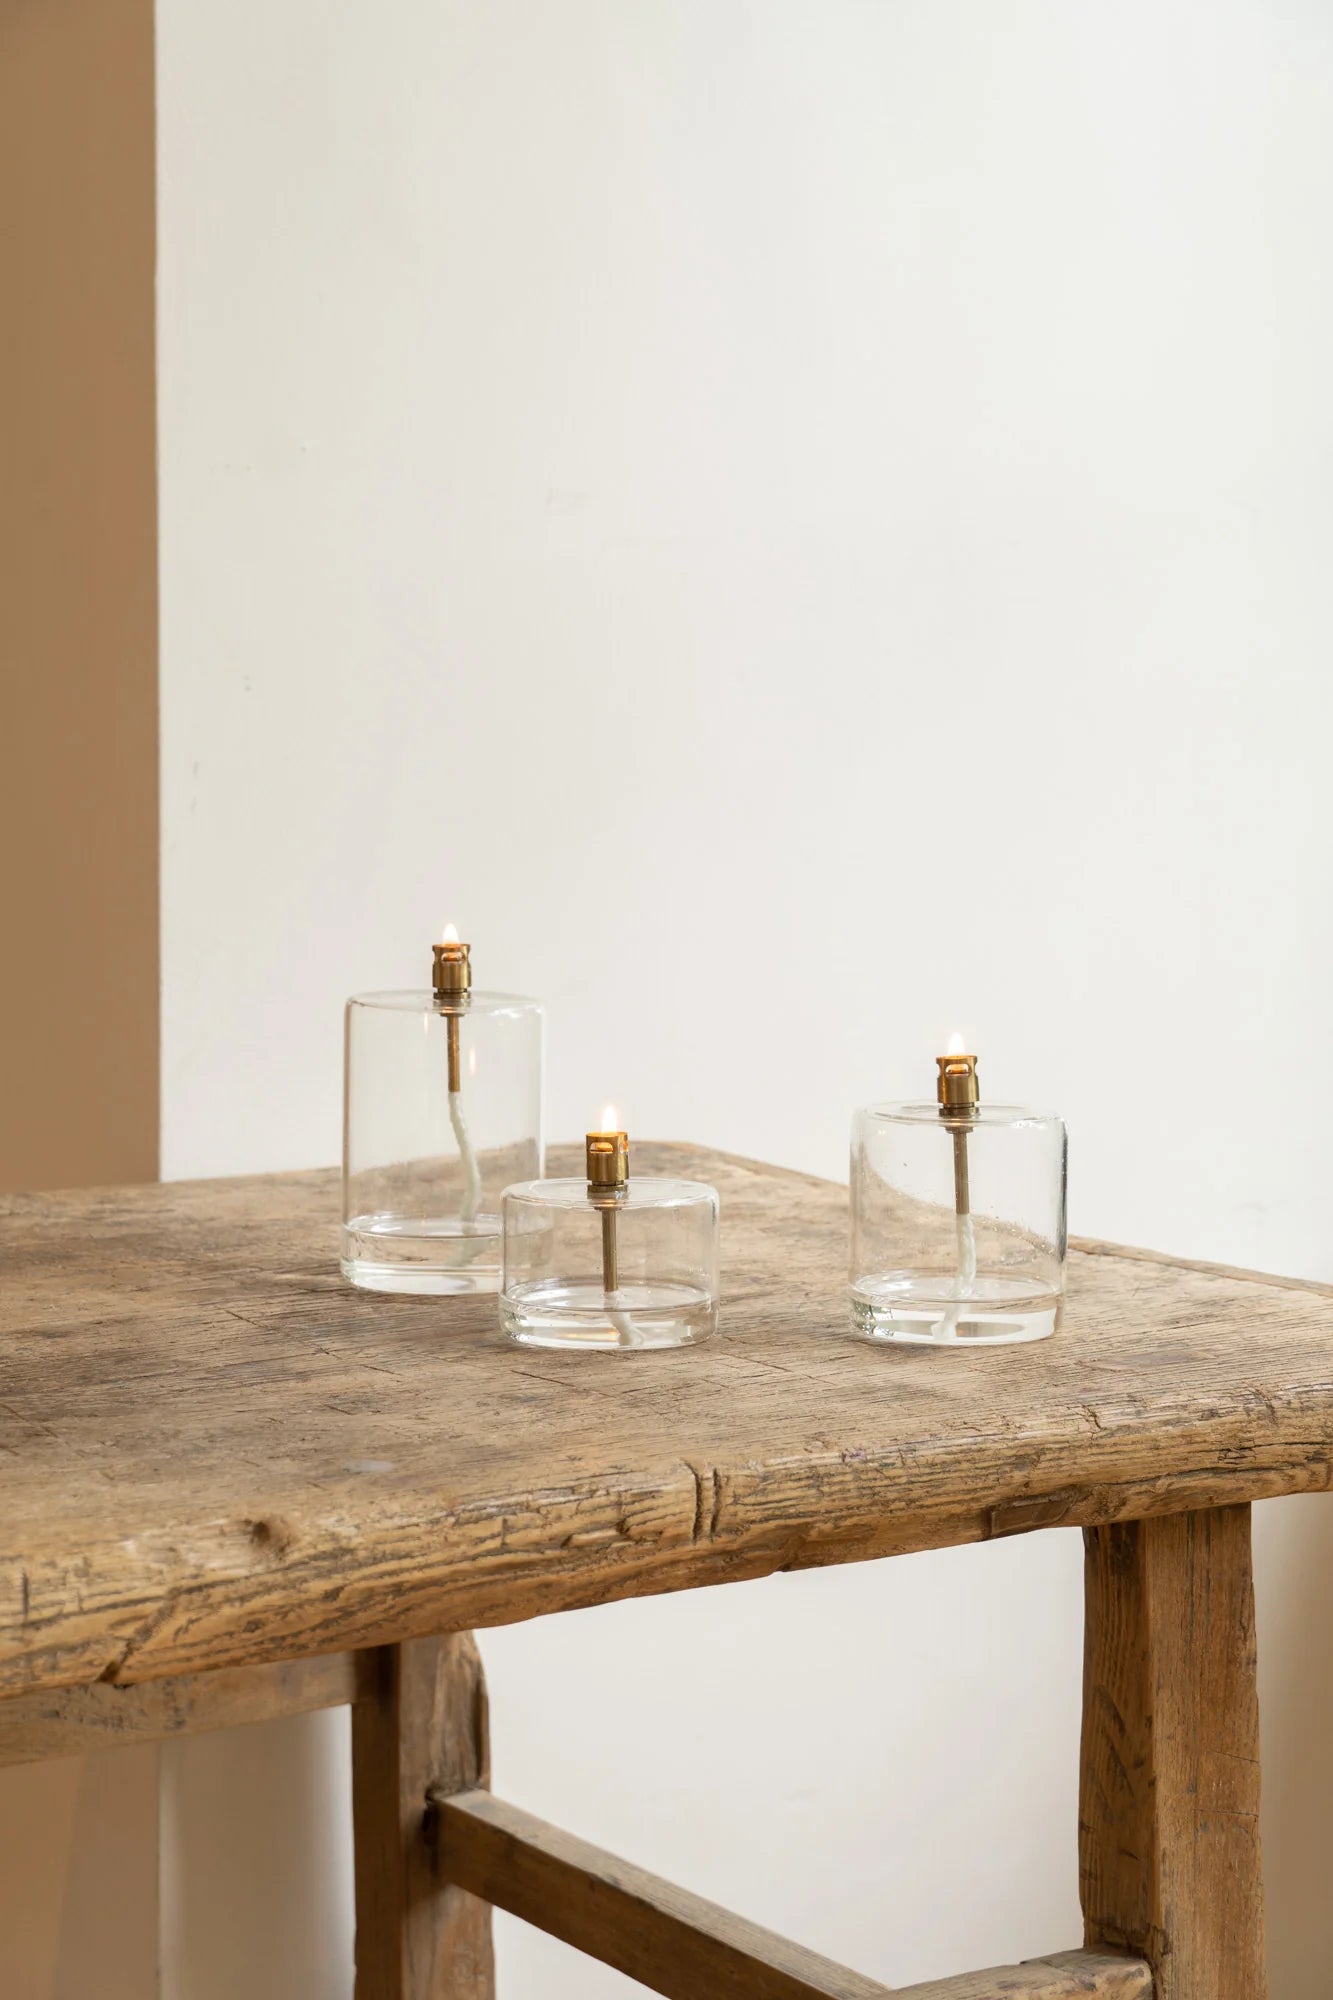 three cylinder oil lamps on table